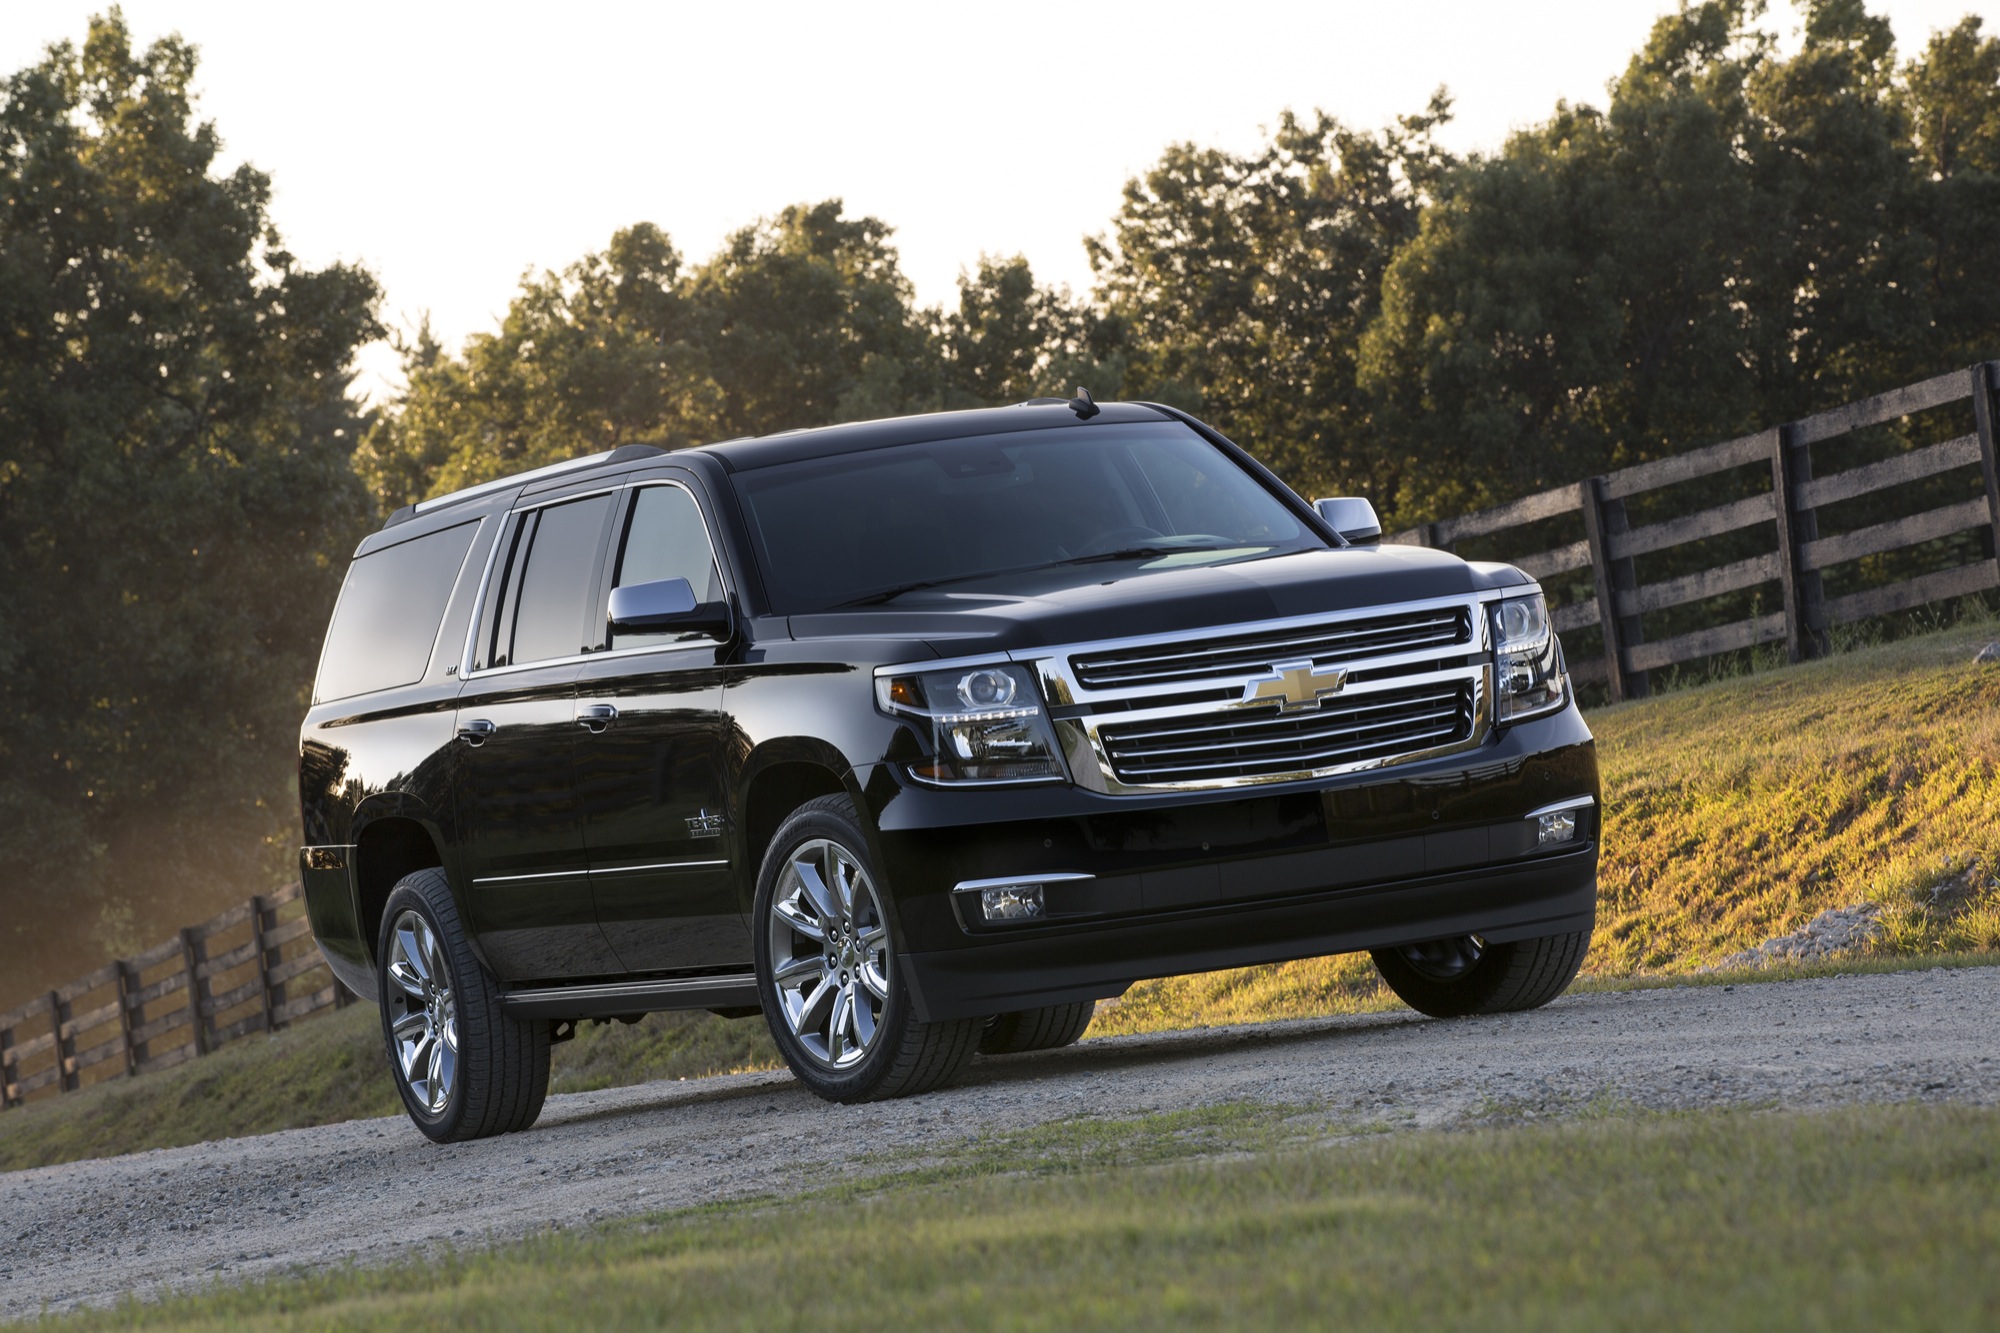 2017 Chevy Suburban Info, Specs, Pictures, Wiki | Gm Authority